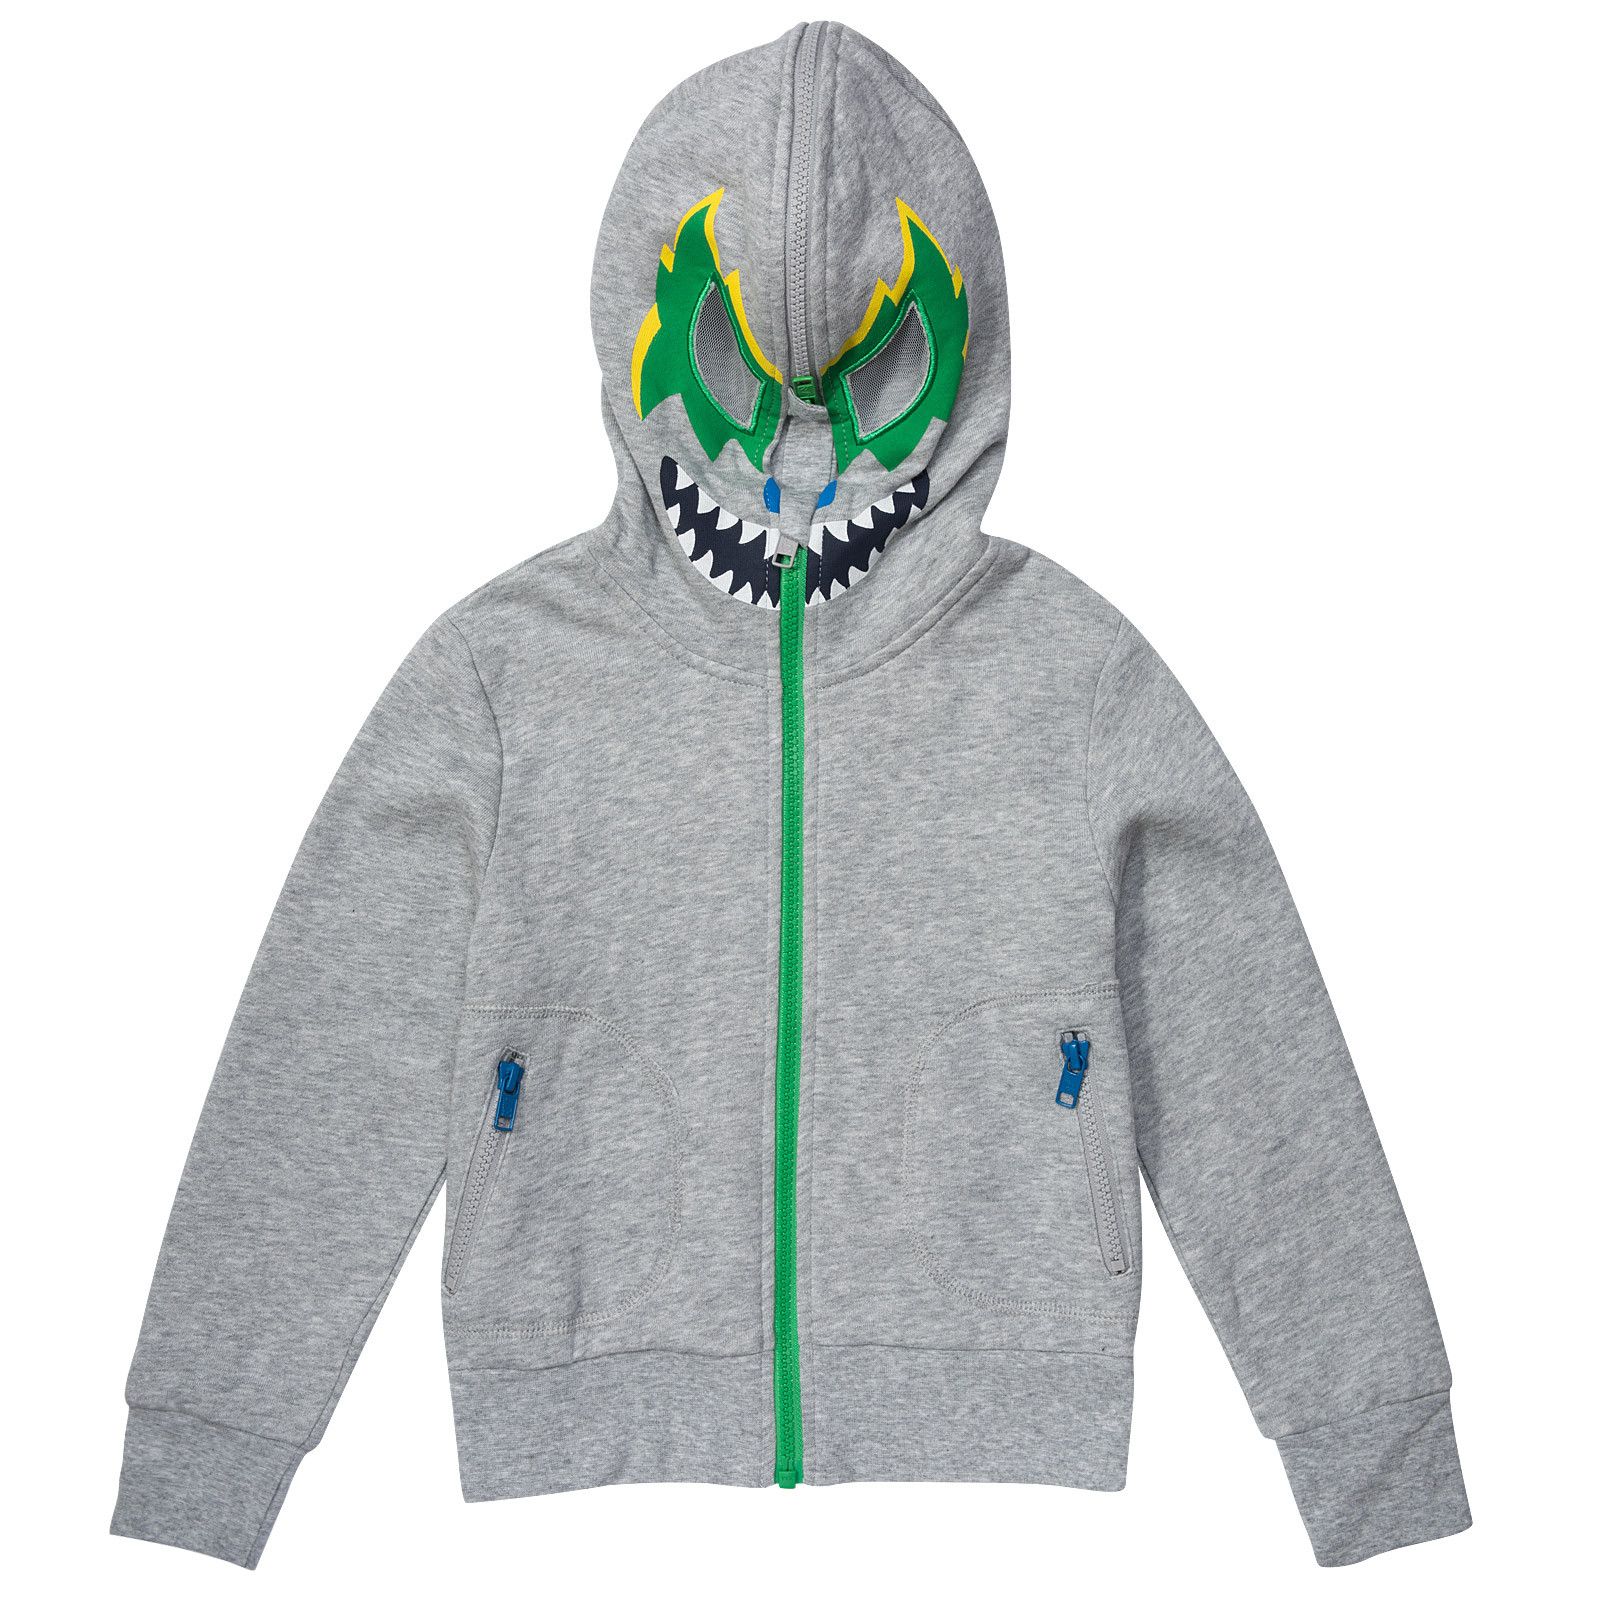 Bandit Boys Grey Hooded Zip-Up Top With Monster Print - CÉMAROSE | Children's Fashion Store - 1